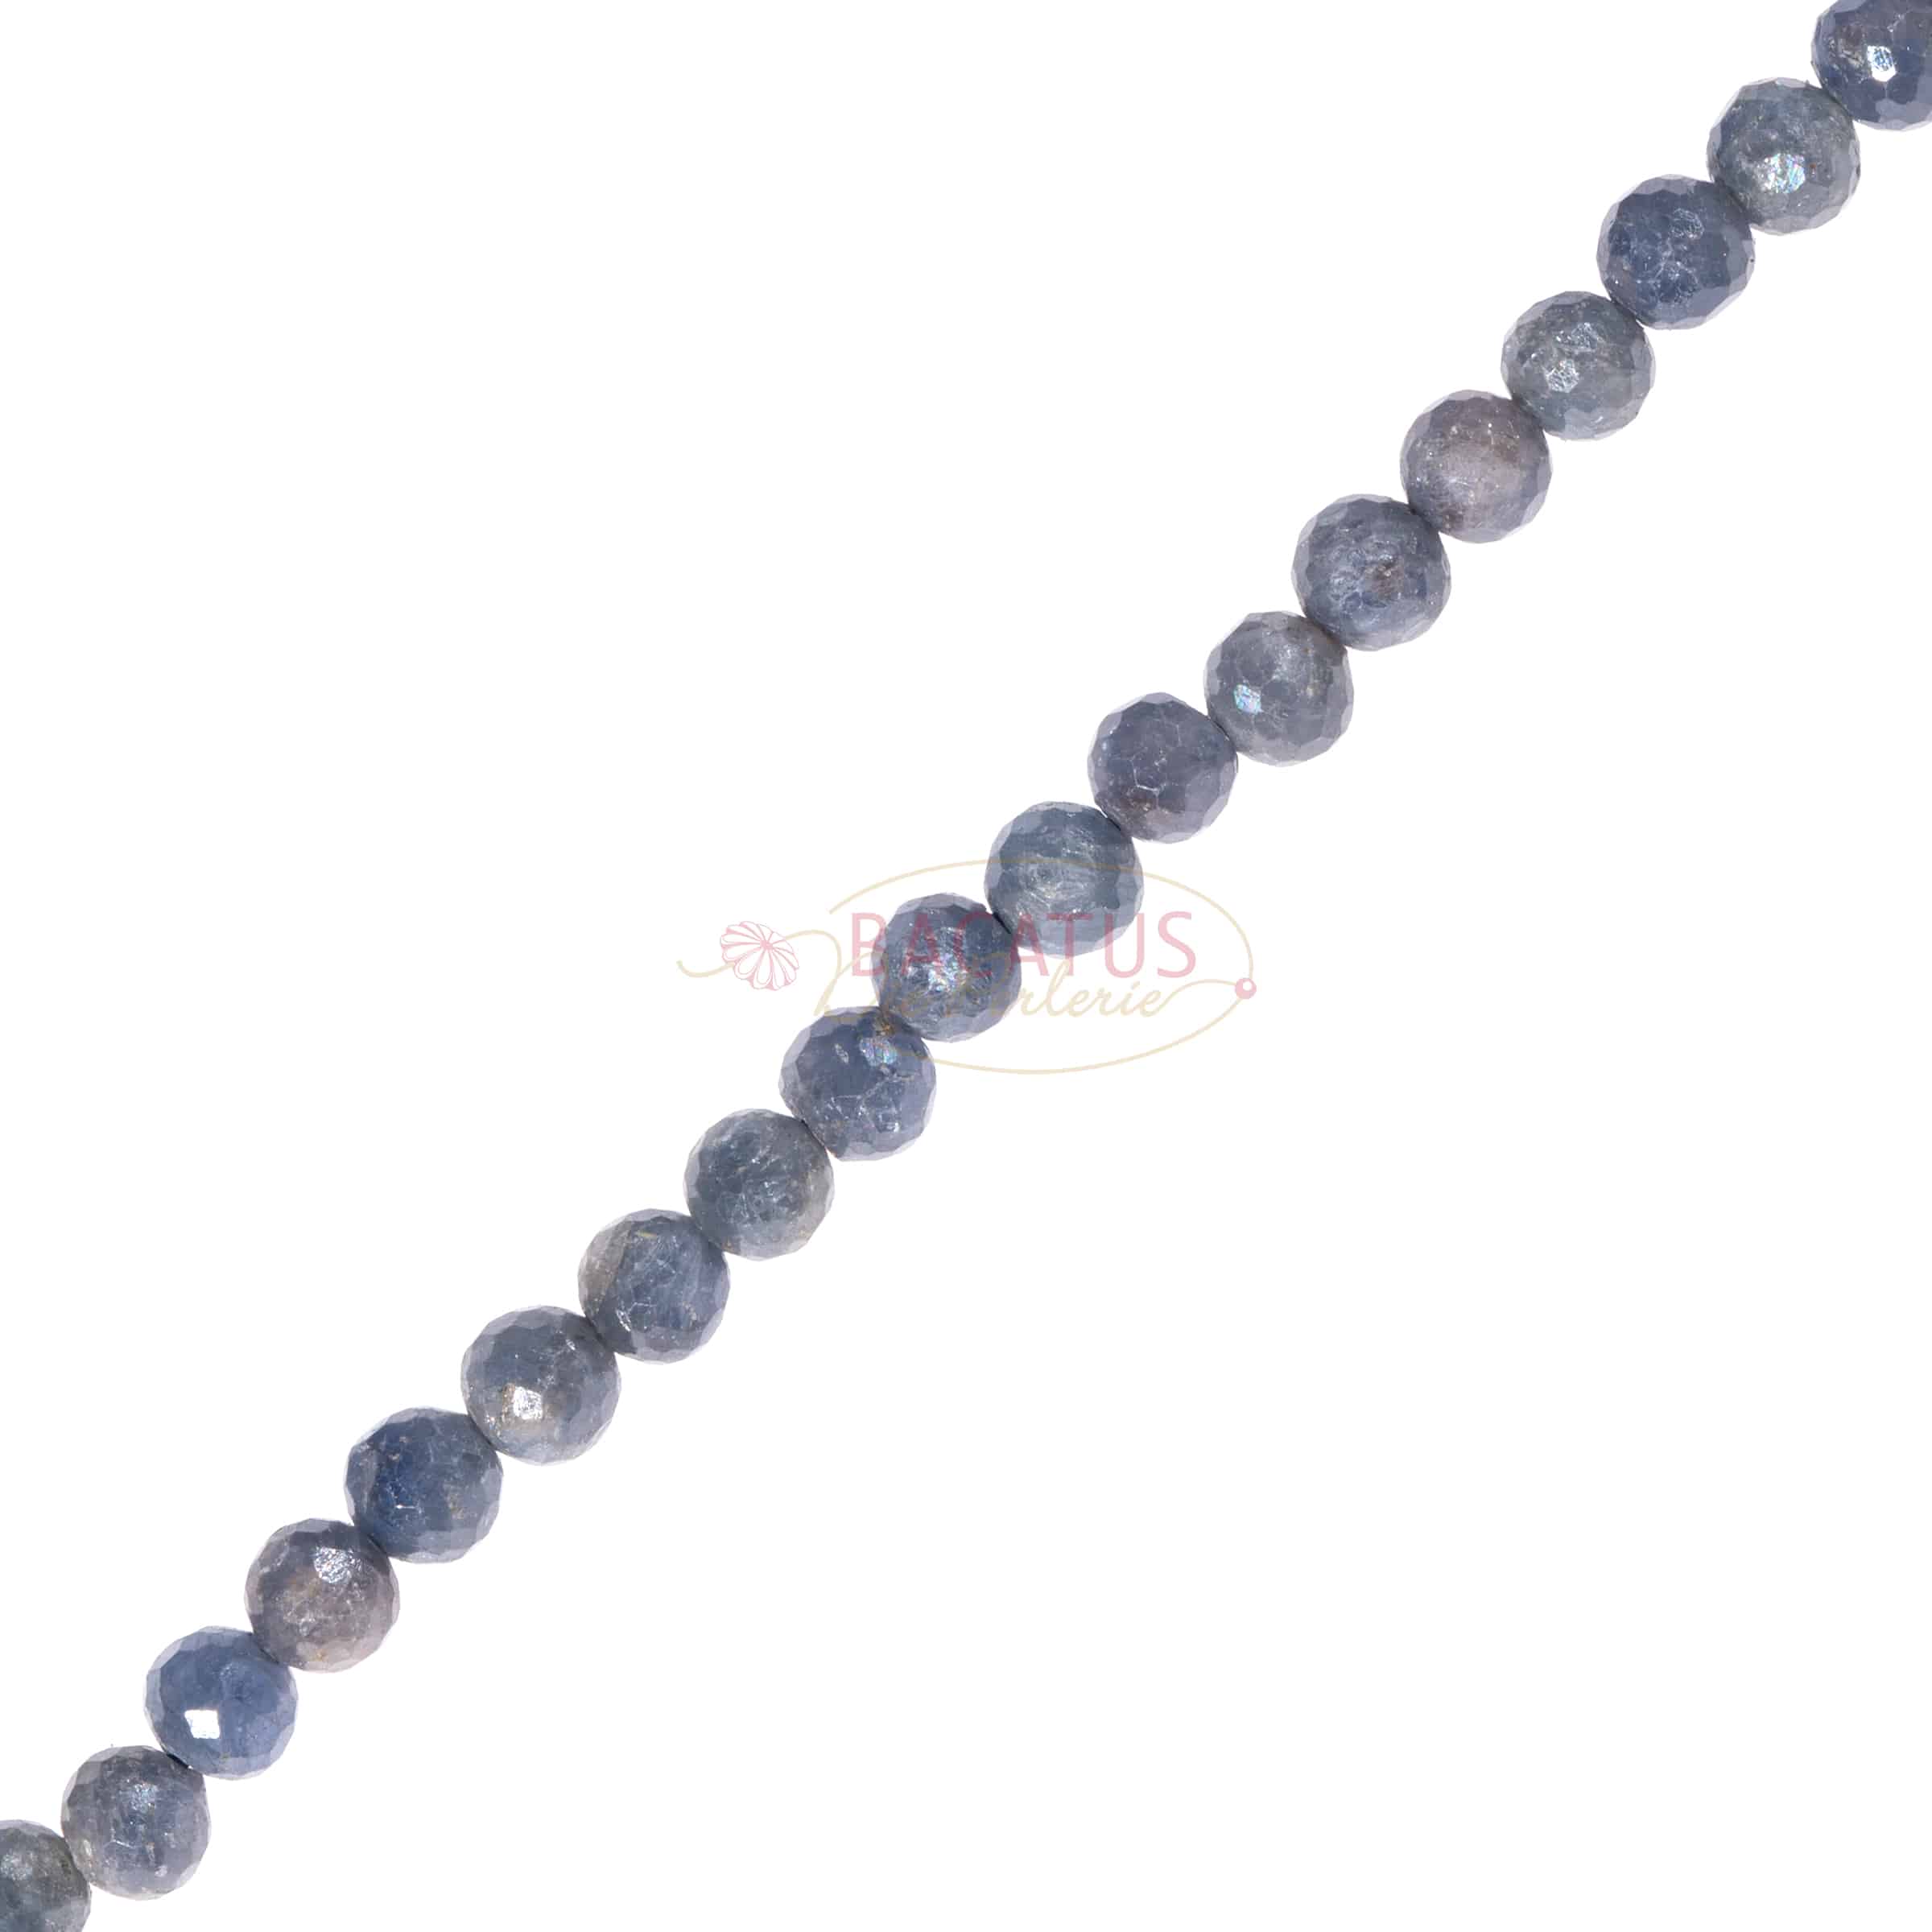 Sapphire plain round faceted approx. 4mm, 1 strand